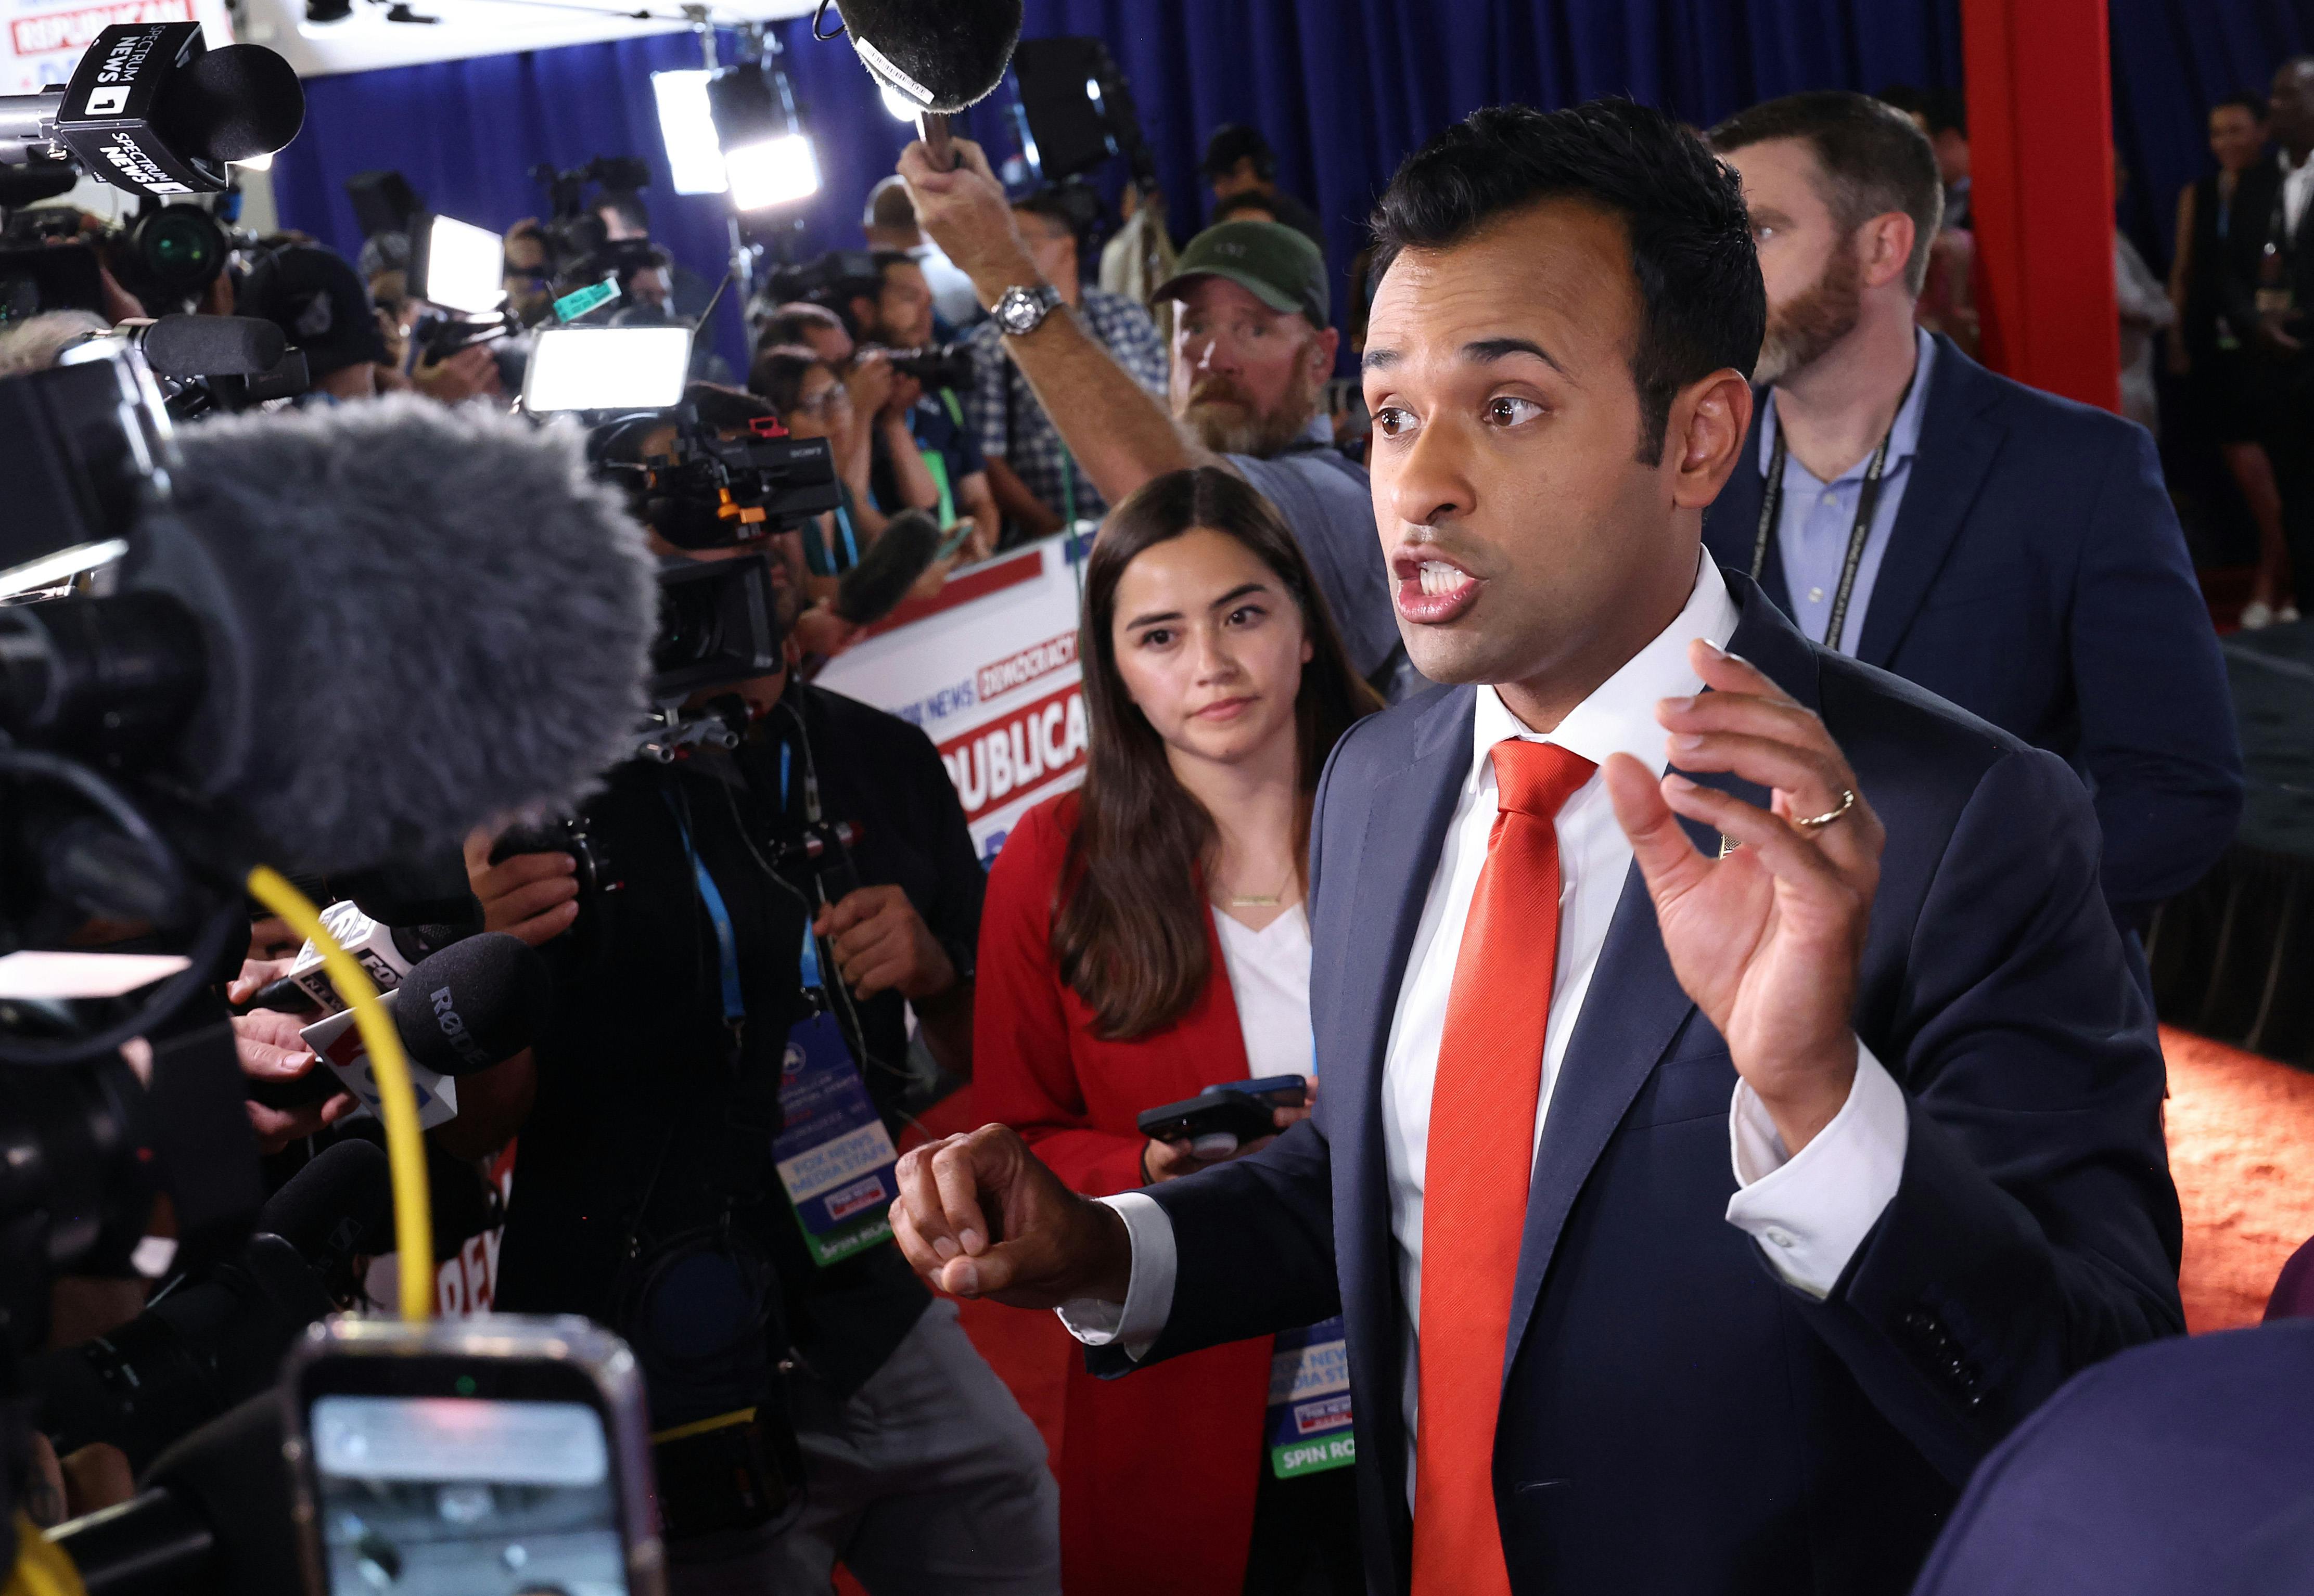 Vivek Ramaswamy Is Trying to Use His Campaign to Dodge a Legal Battle The New Republic picture